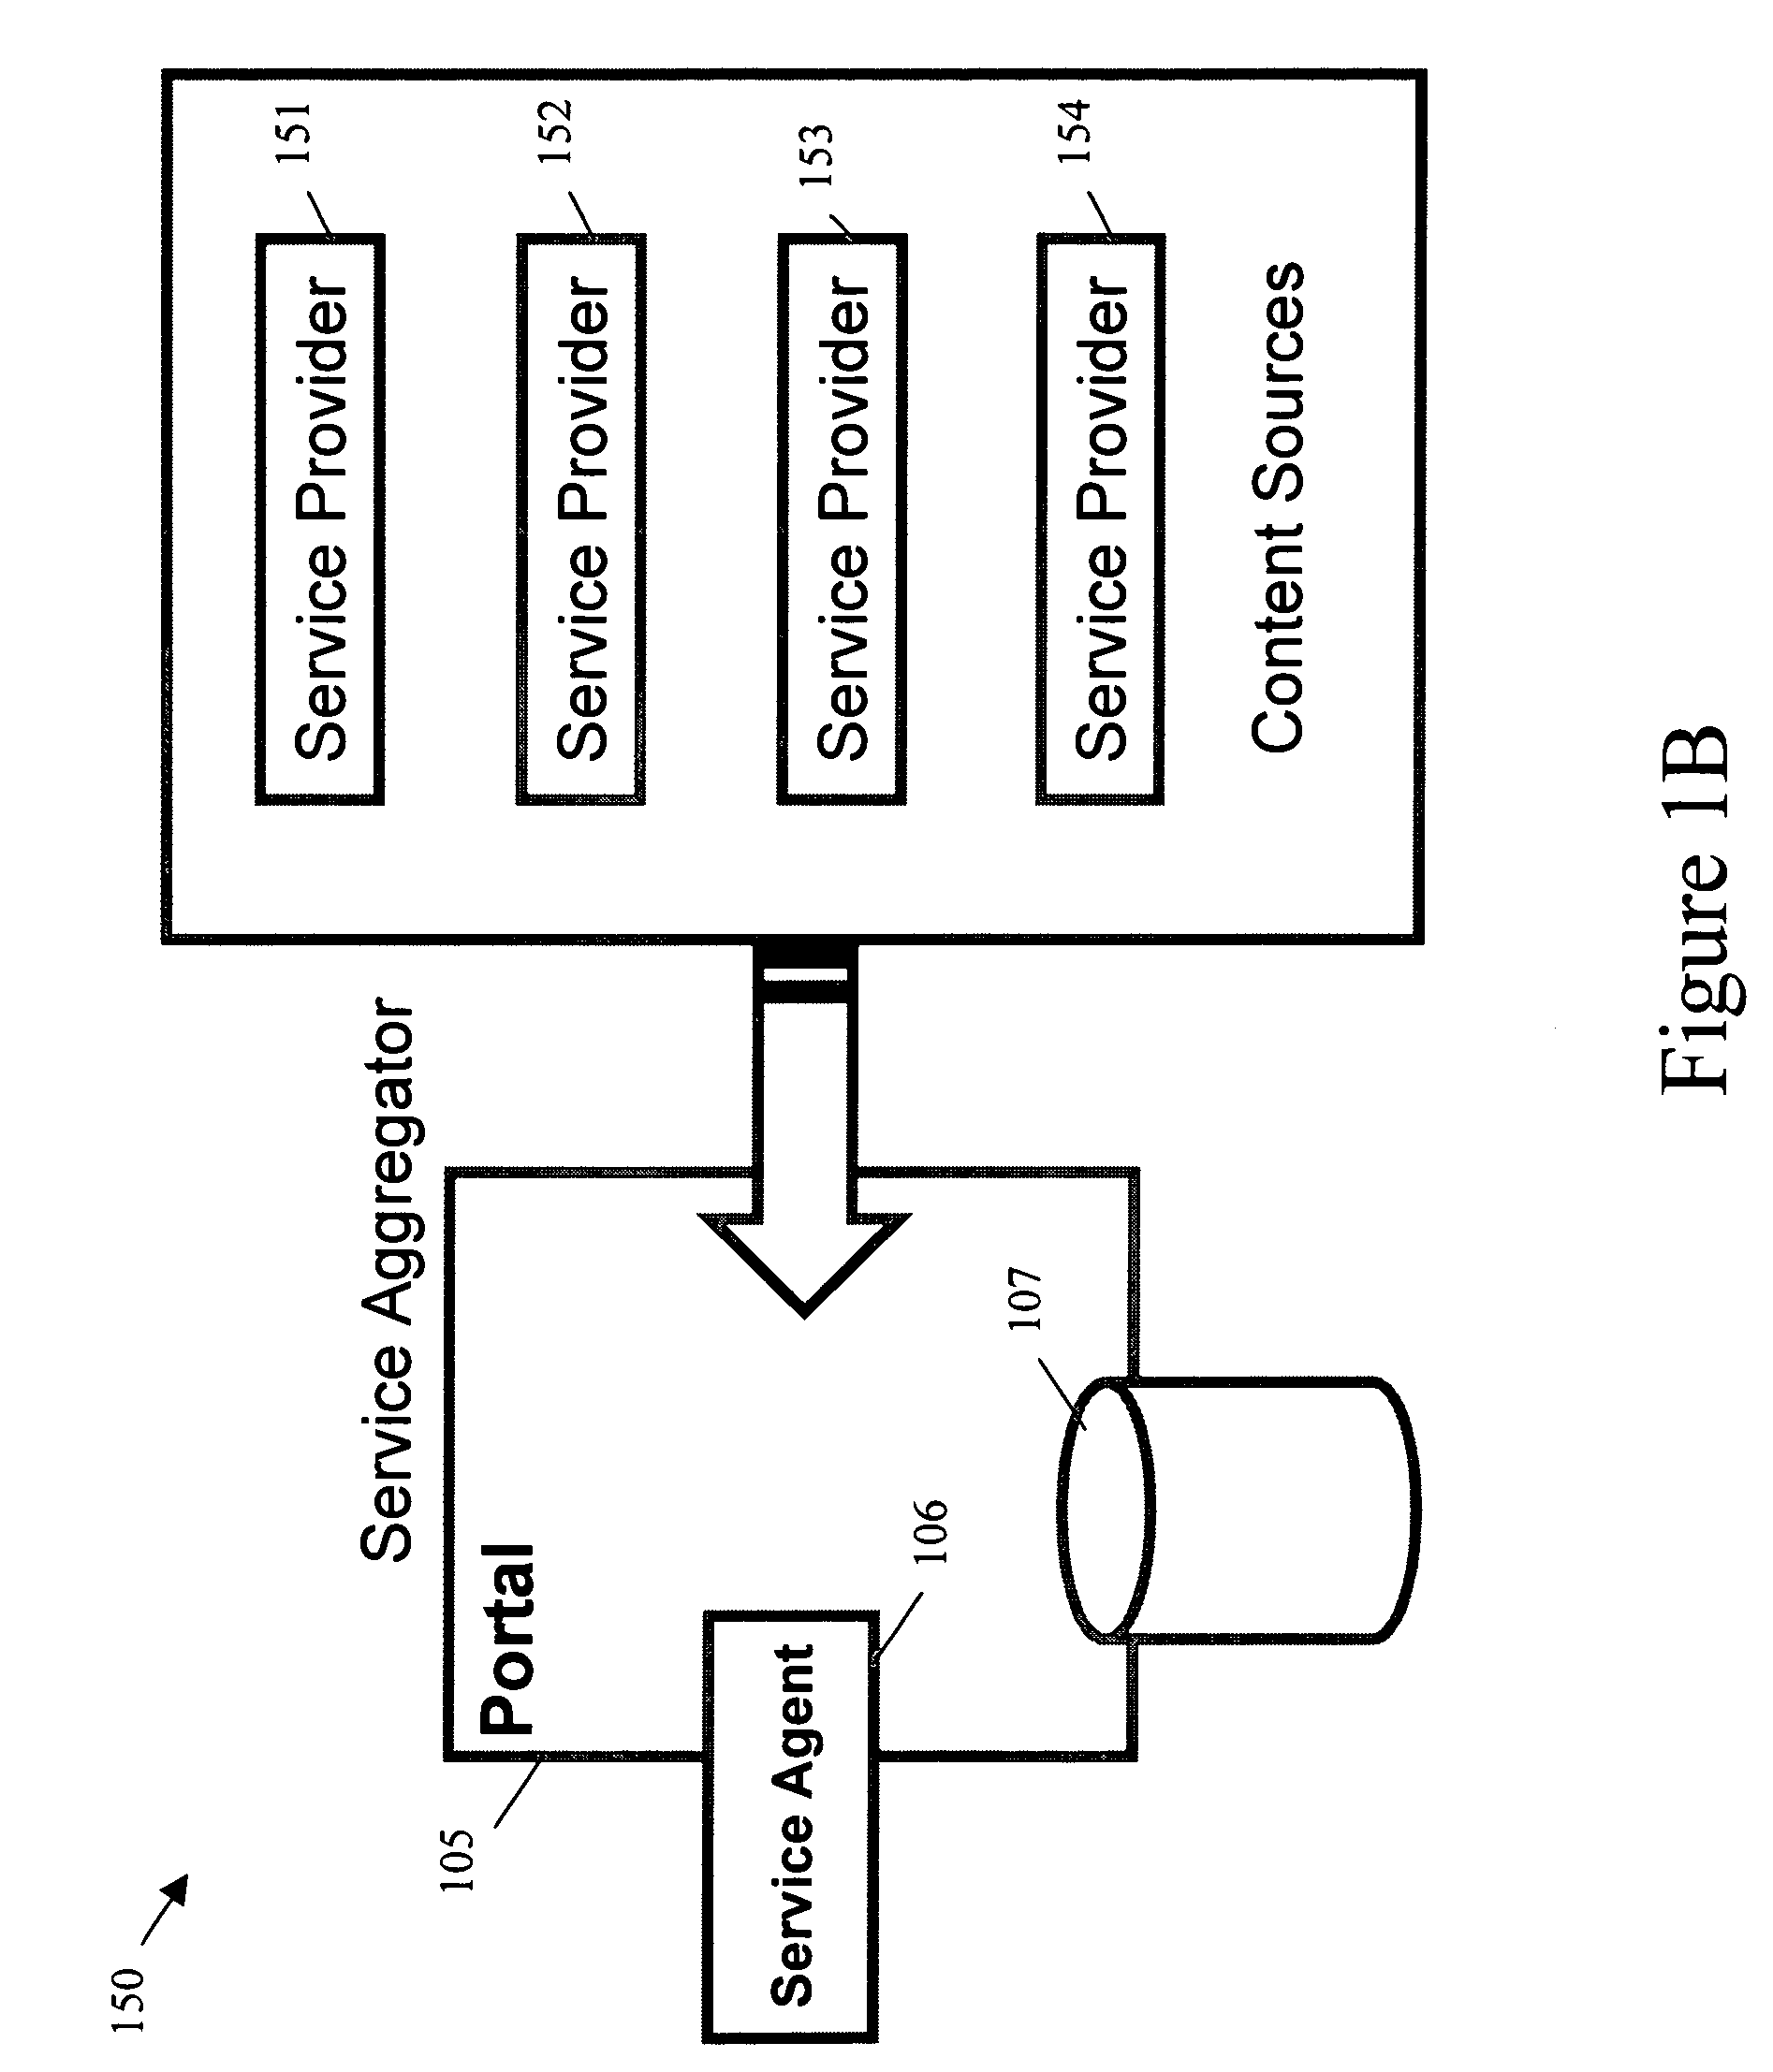 Apparatus, method and system for providing automated services to heterogenous devices across multiple platforms